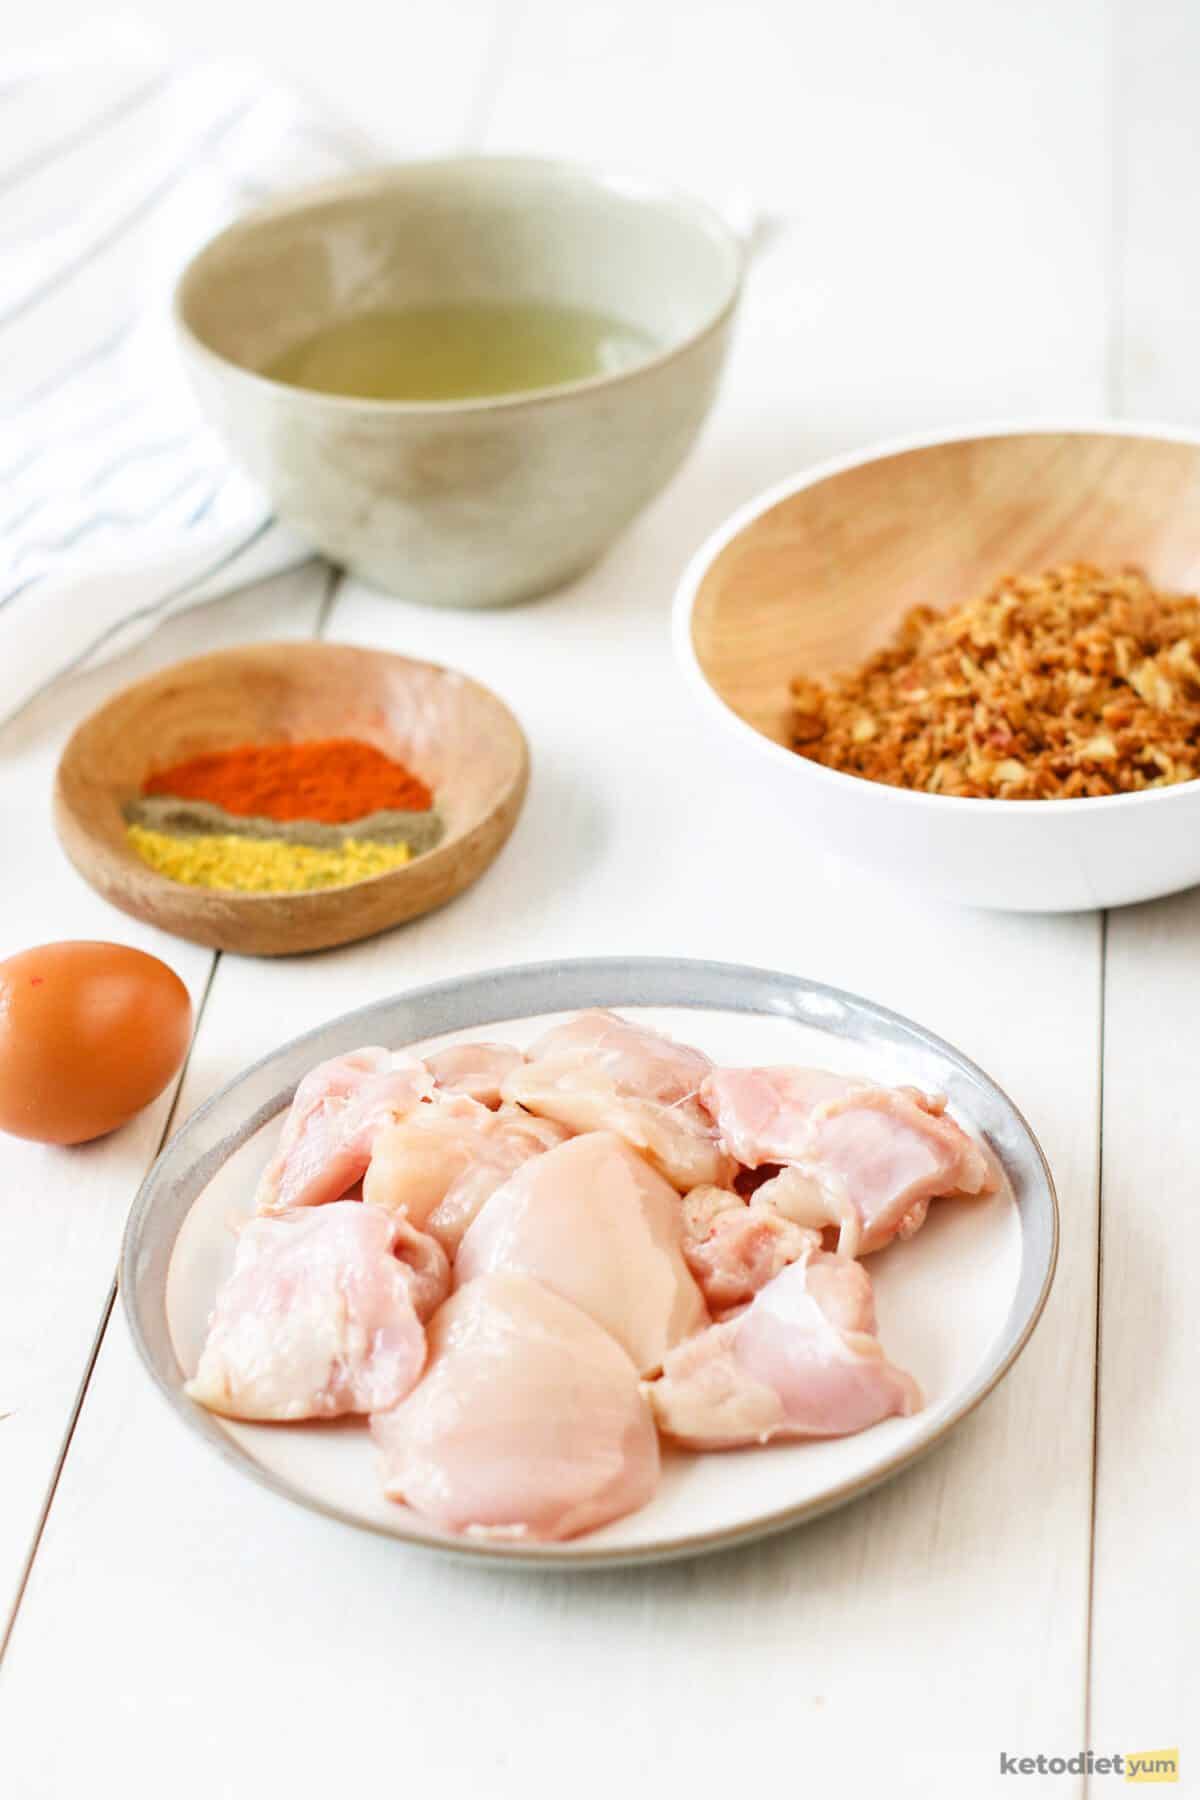 Ingredients arranged on a table to make keto chicken nuggets including chicken, egg, pork rinds, garlic powder, smoked paprika, salt and black pepper